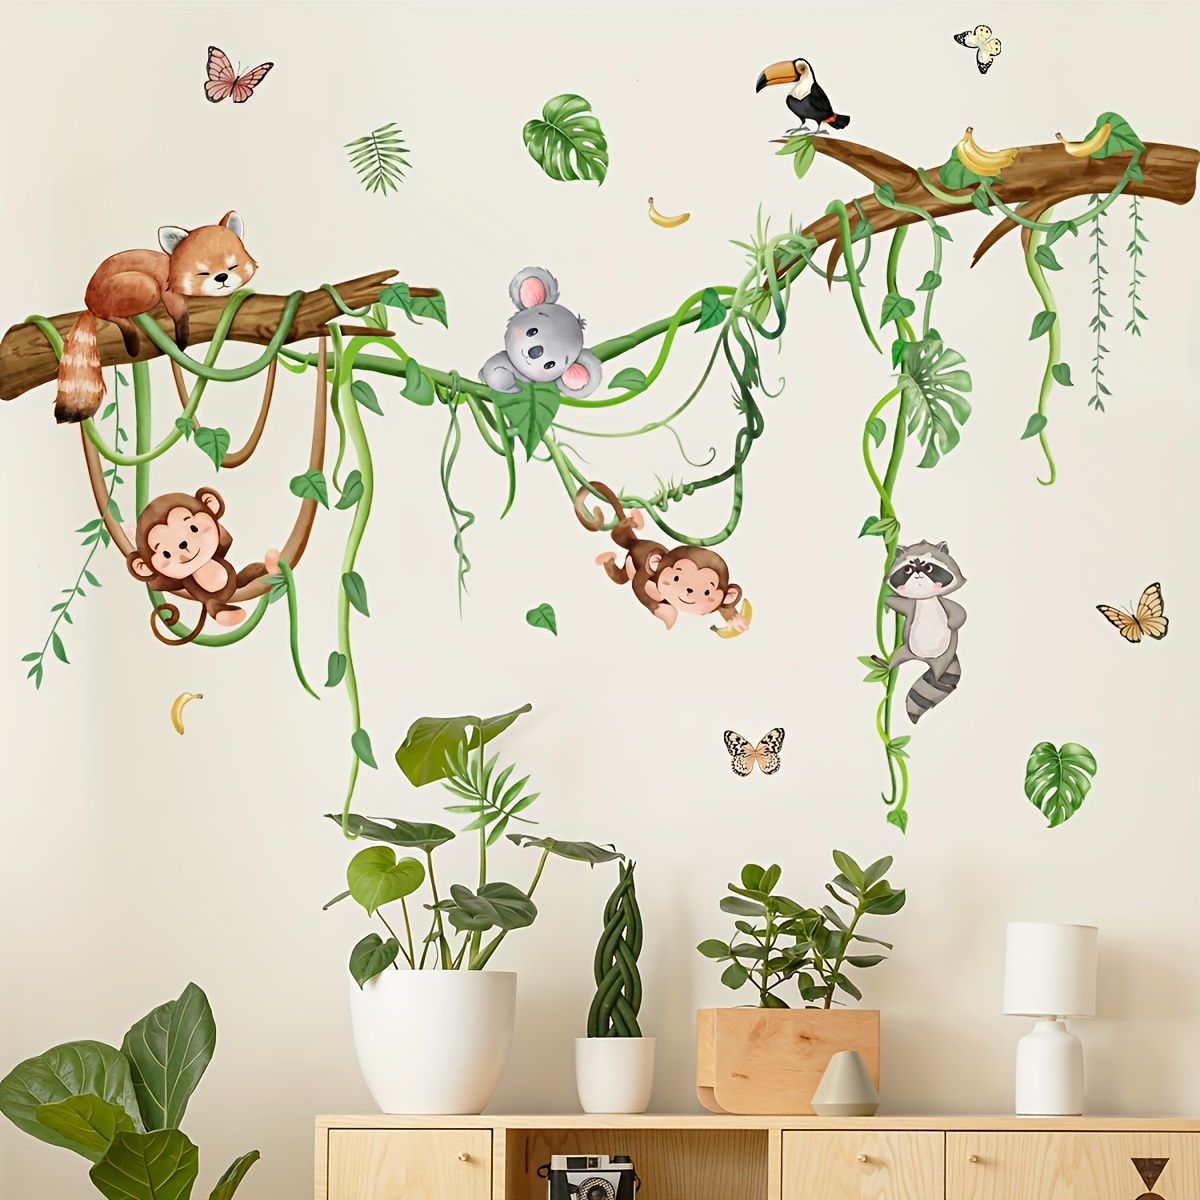 

1pc Jungle Animal Wall Decals, Creative Cartoon Vine Monkeys Forest , Removable Plastic Wall Stickers For Living Room & Bedroom, Kids Room Decor, Size 47.24 X 35.43 Inches